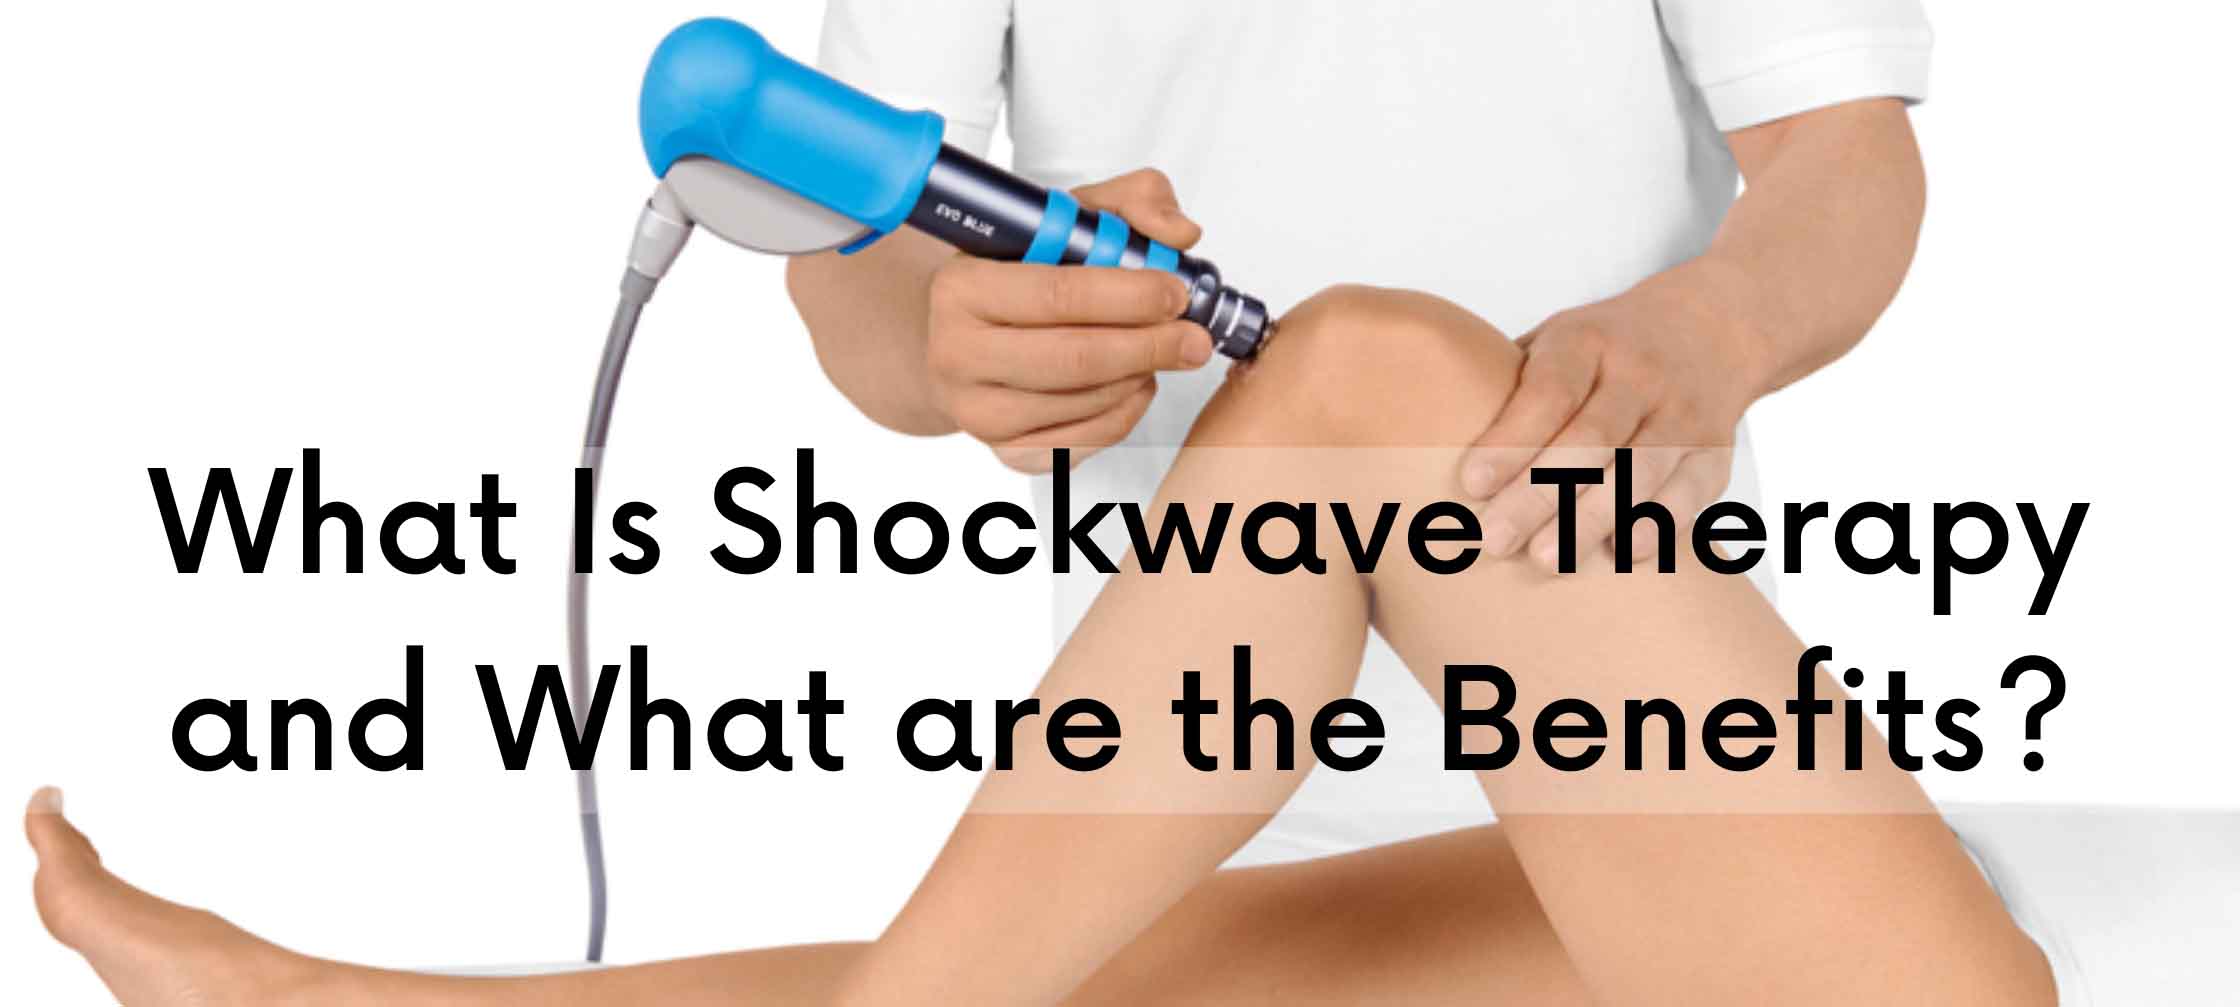 shockwave therapy Clapham London